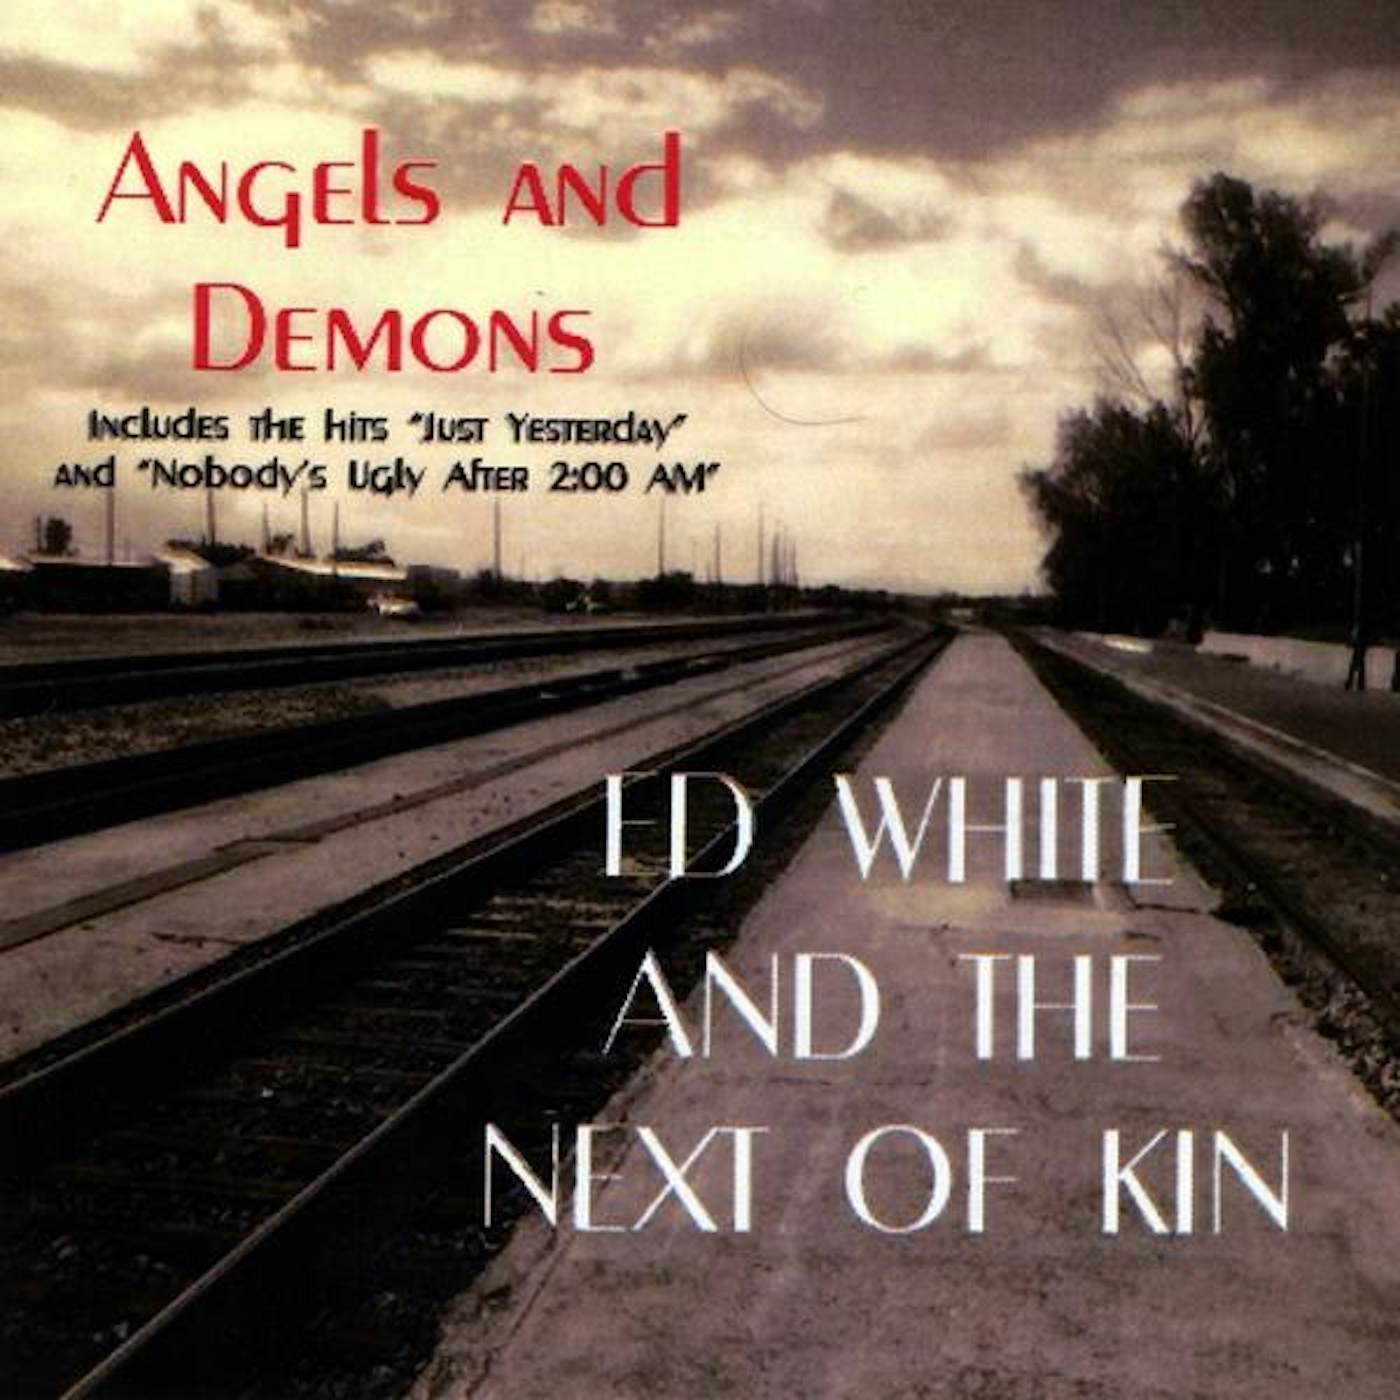 Ed White ANGELS AND DEMONS CD